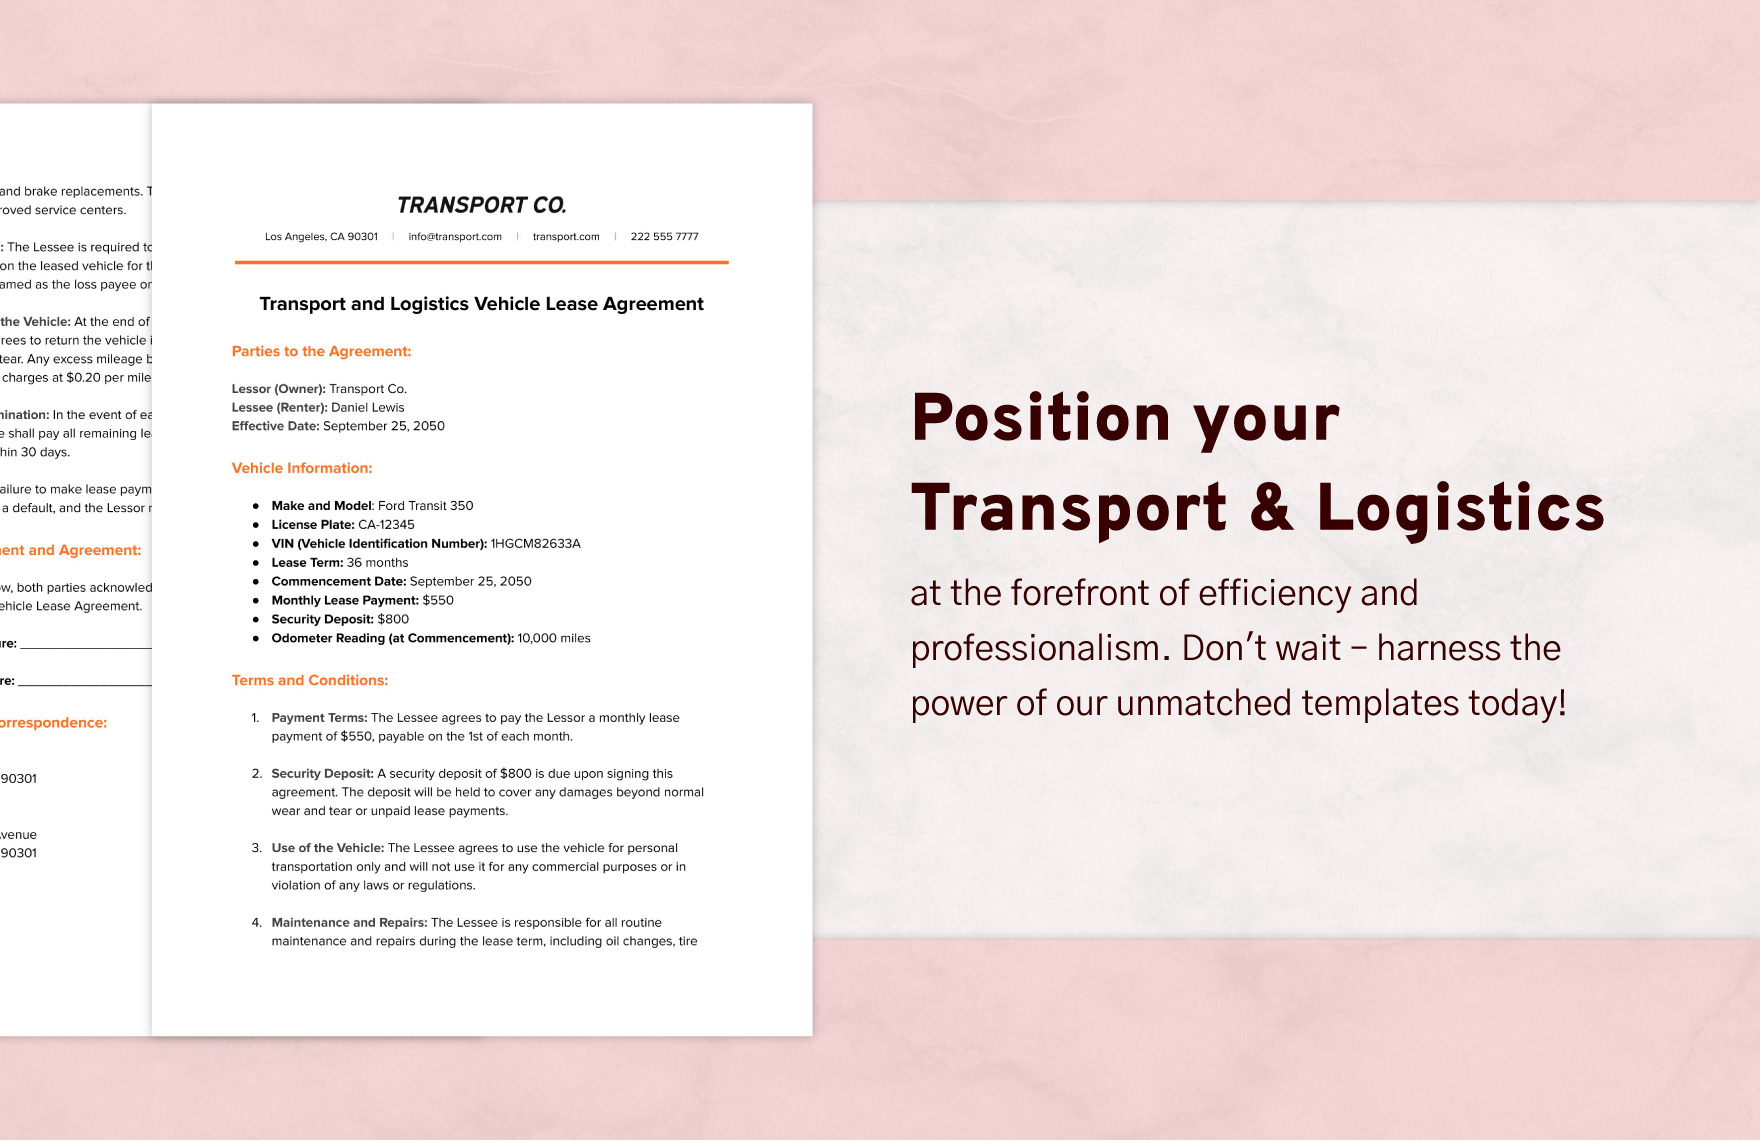 Transport and Logistics Vehicle Lease Agreement Template